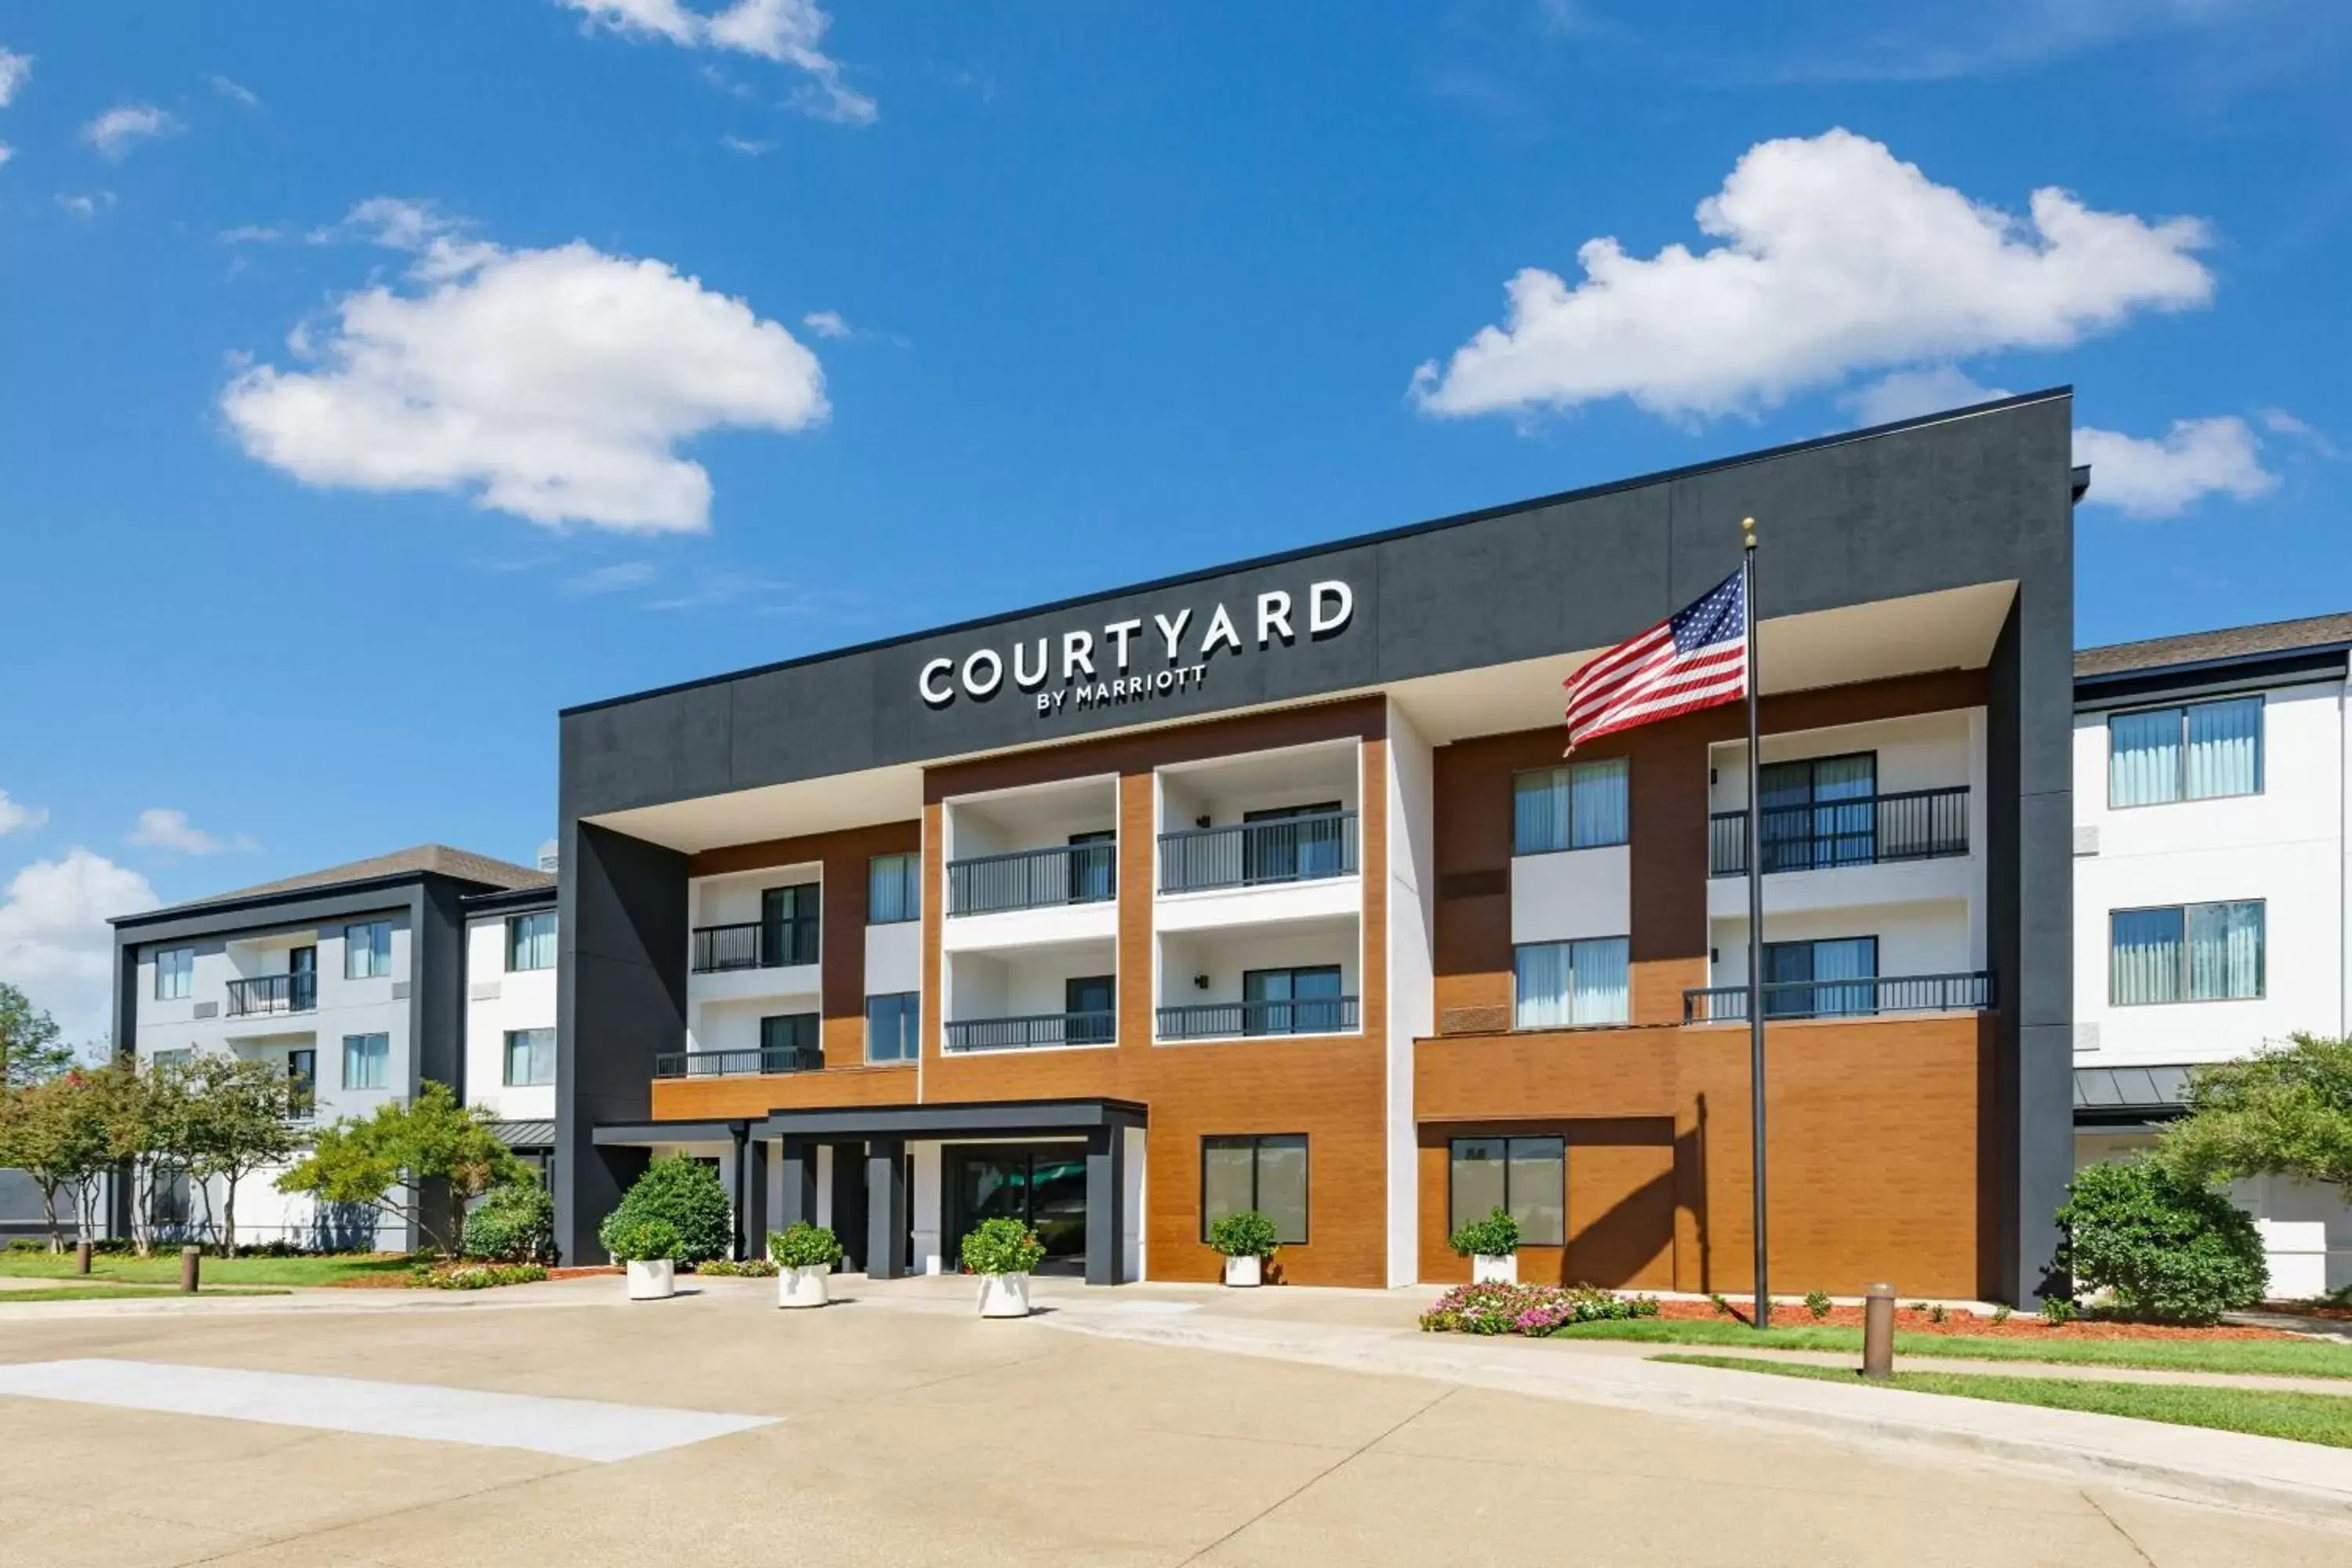 Property Building in Courtyard by Marriott Dallas Lewisville